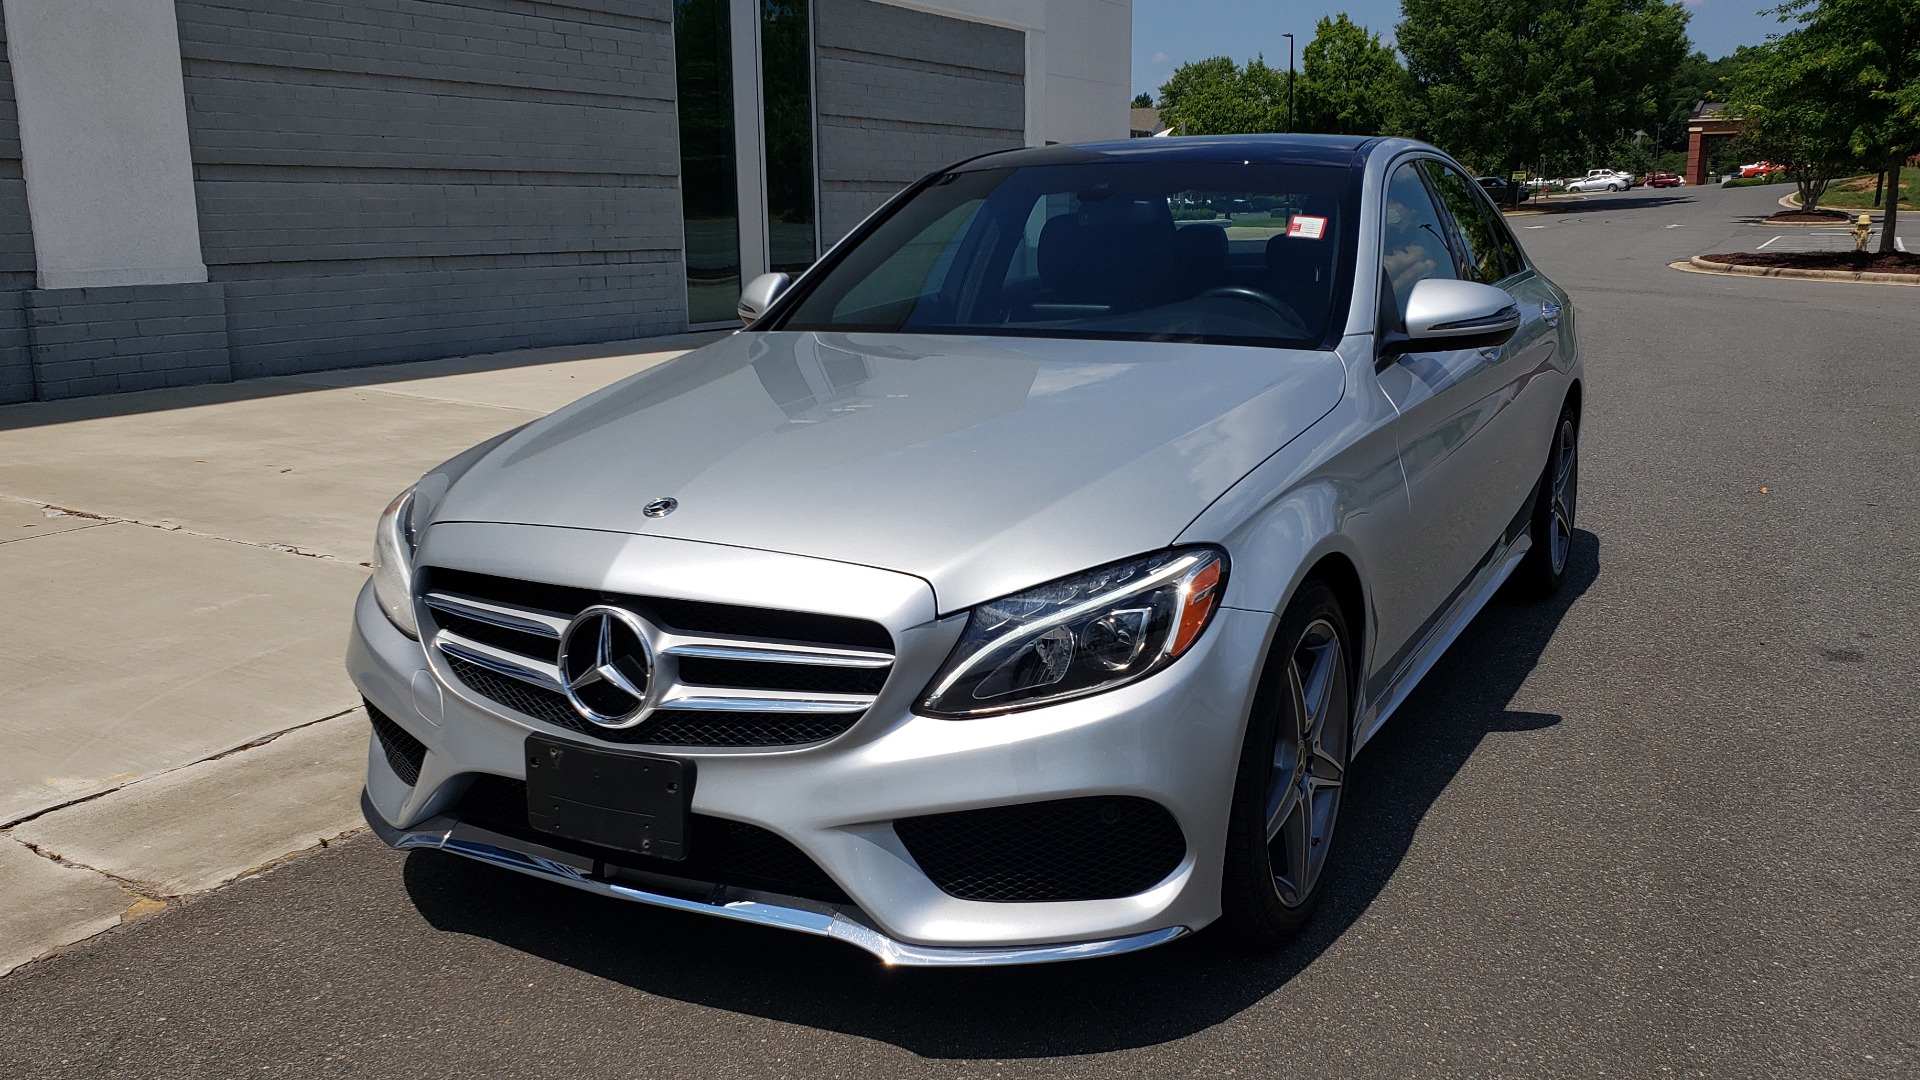 Used 2018 Mercedes-Benz C-CLASS C 300 4MATIC / PREMIUM PKG / PANO-ROOF / AMG LINE / BURMESTER / REARVIEW for sale Sold at Formula Imports in Charlotte NC 28227 3